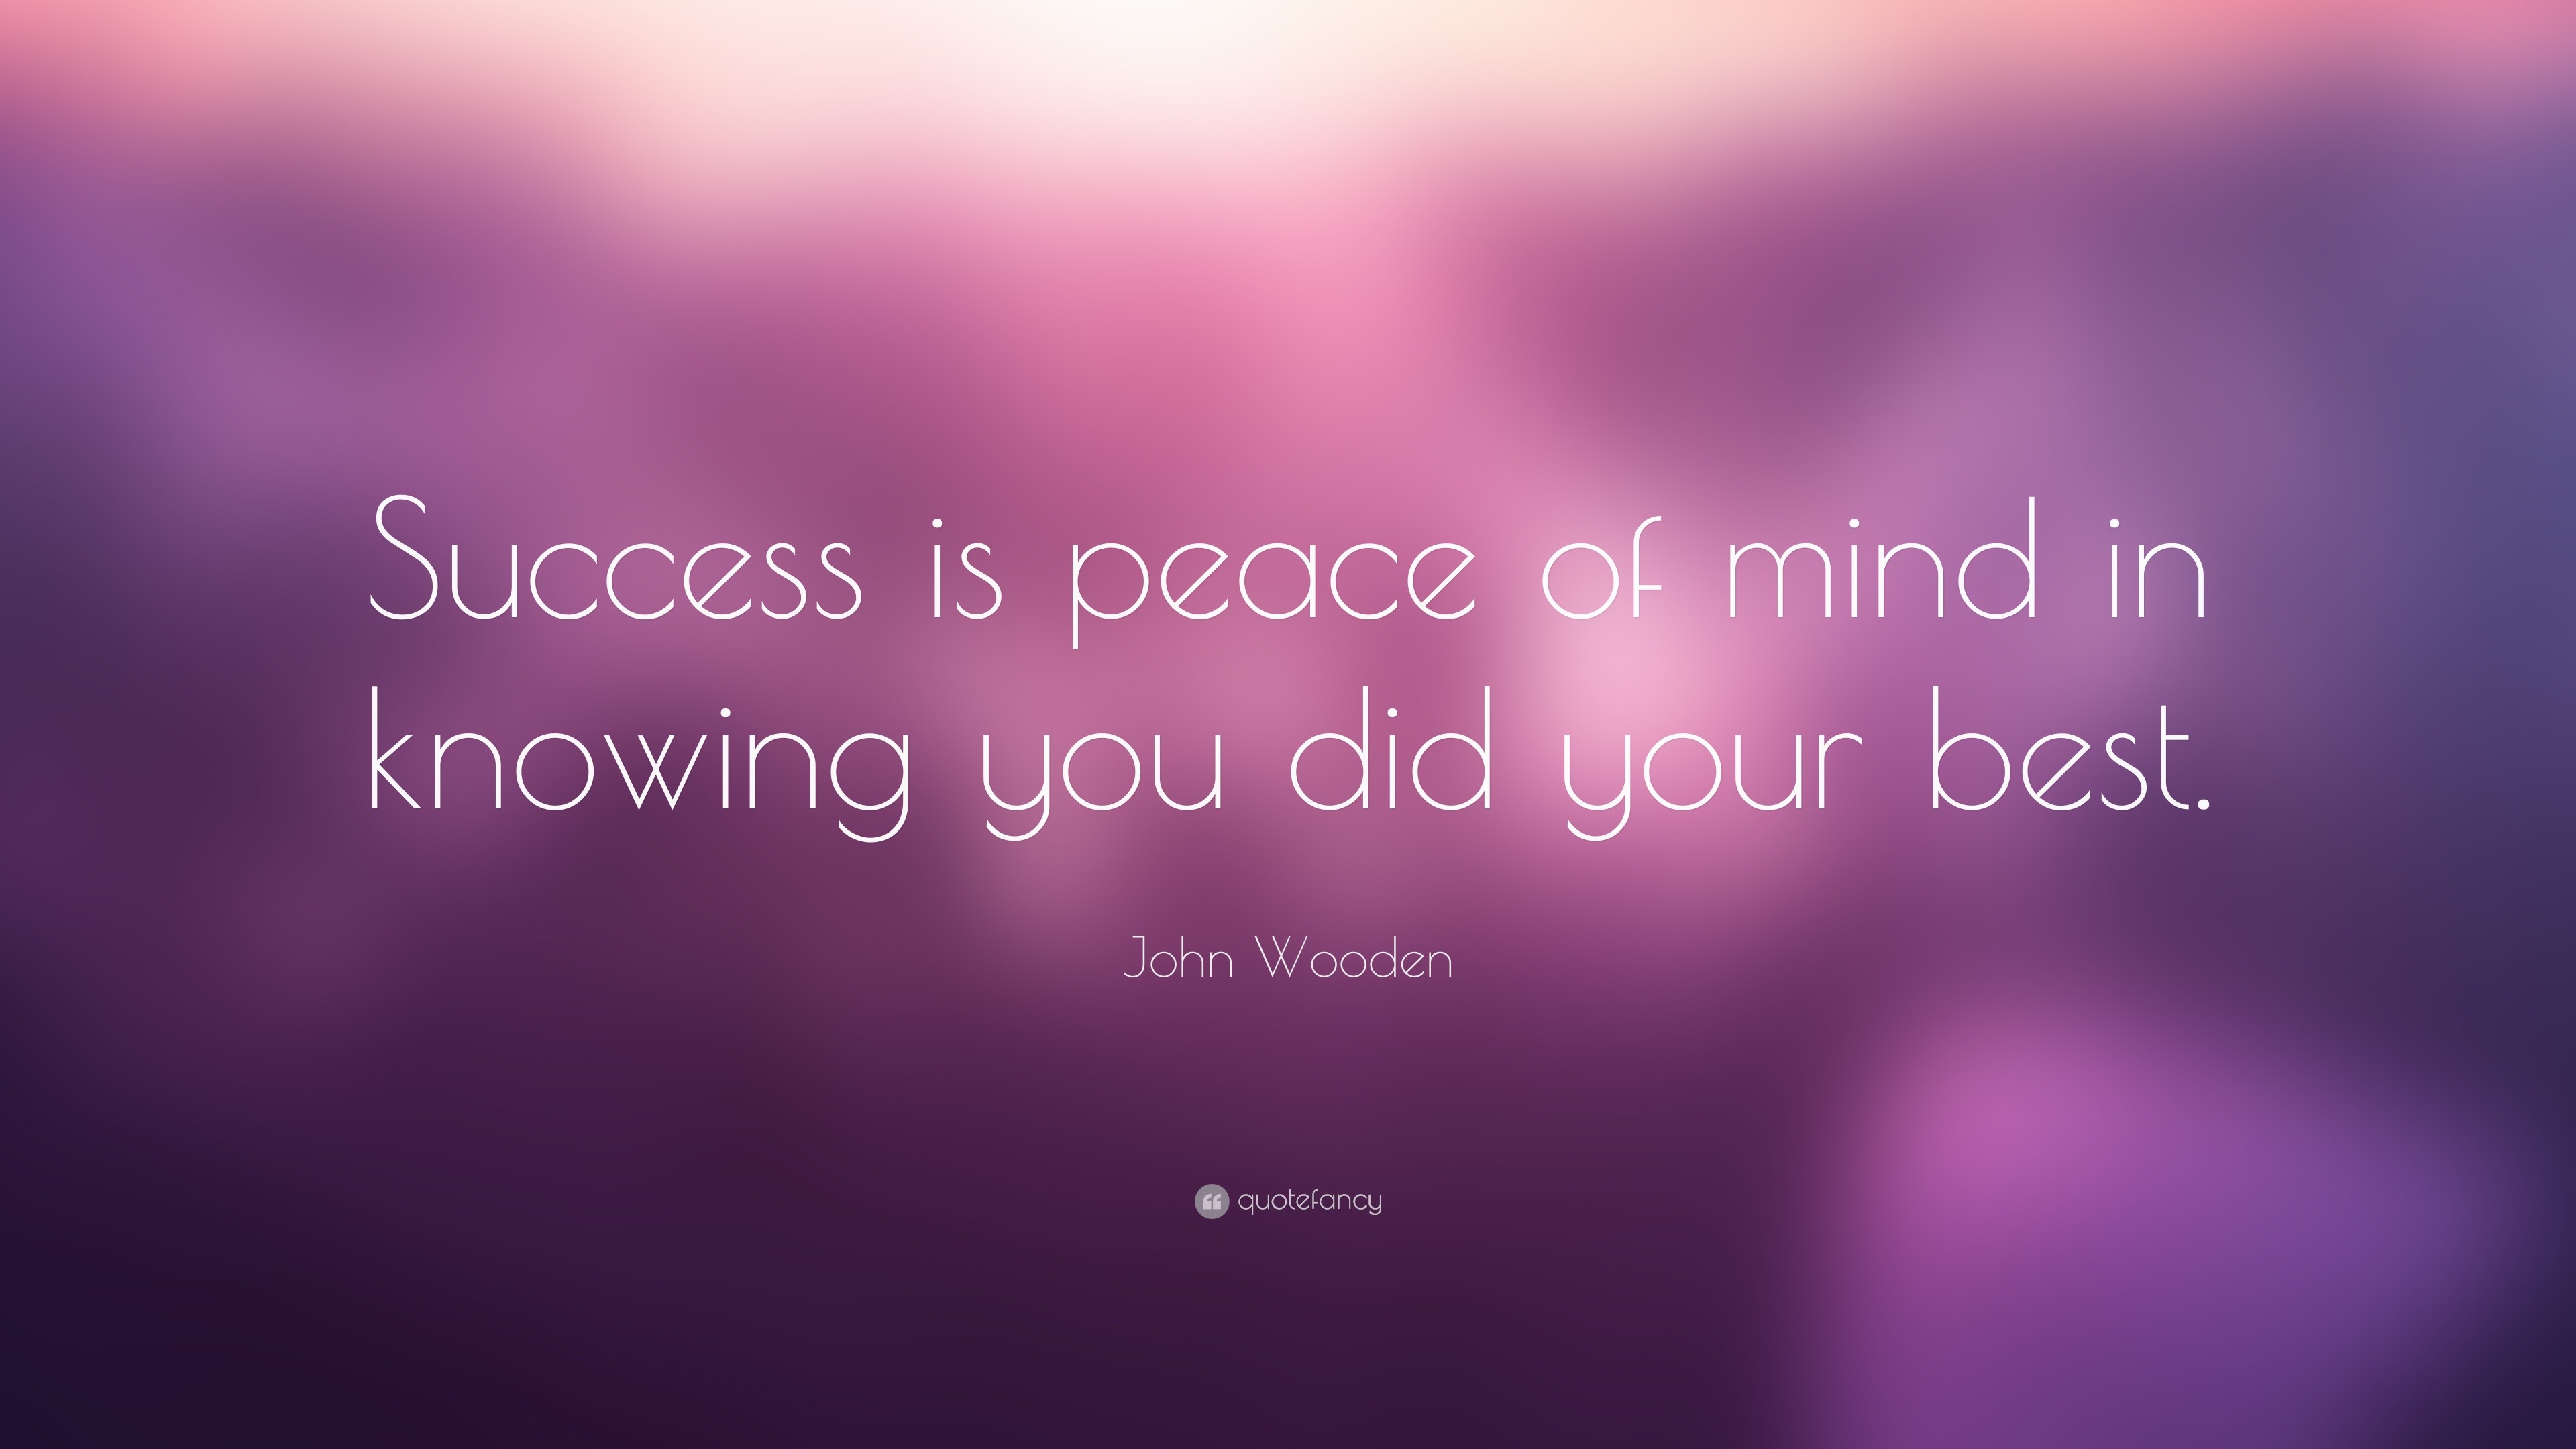 John Wooden Quote: “Success is peace of mind in knowing you did your ...